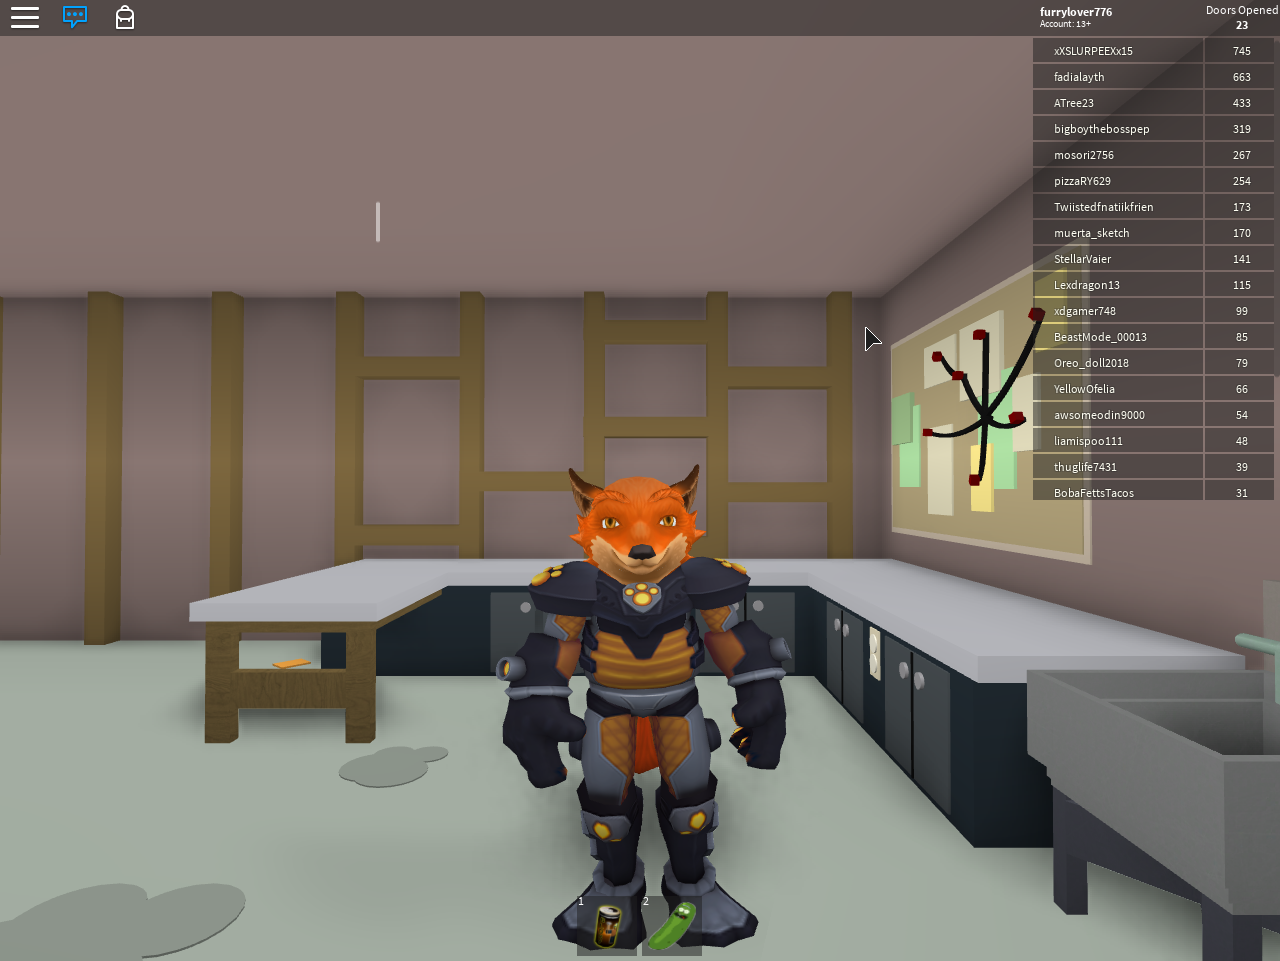 Furry In A Roblox Game By Furryfoxwolfxd Fur Affinity Dot Net - furry model roblox